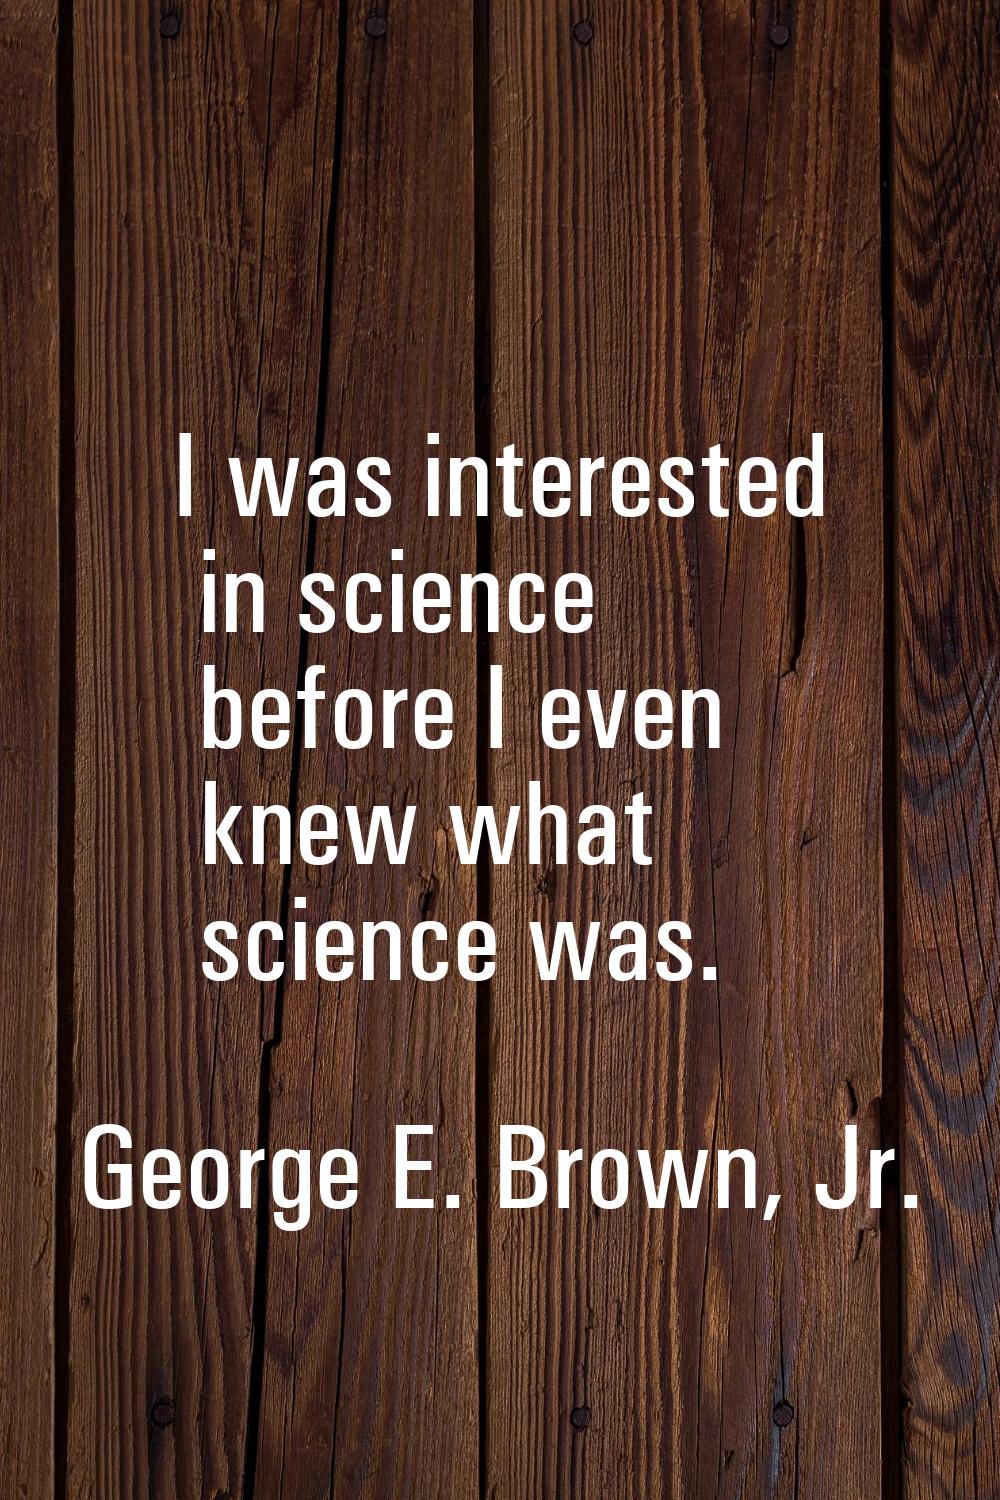 I was interested in science before I even knew what science was.